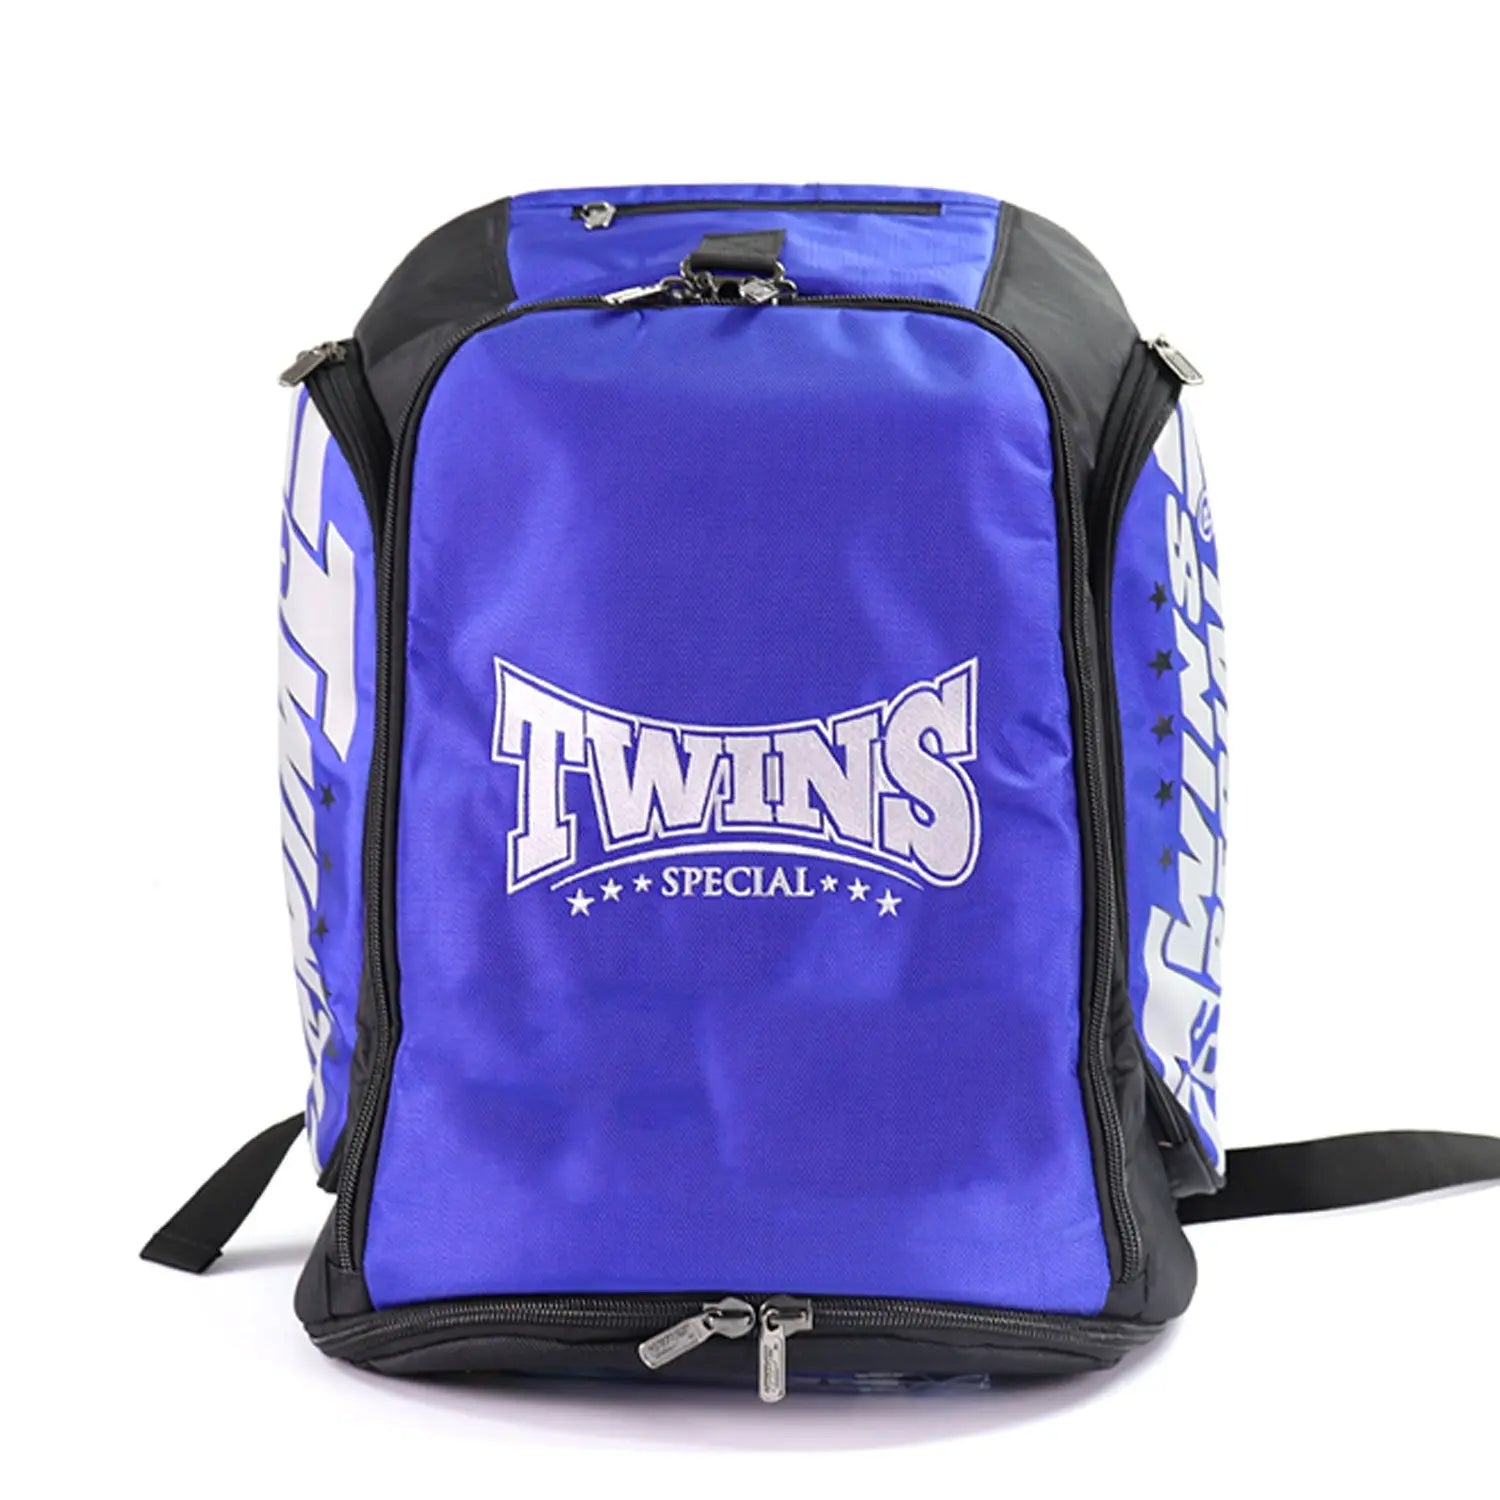 Twins Convertible Rucksack Twins Special